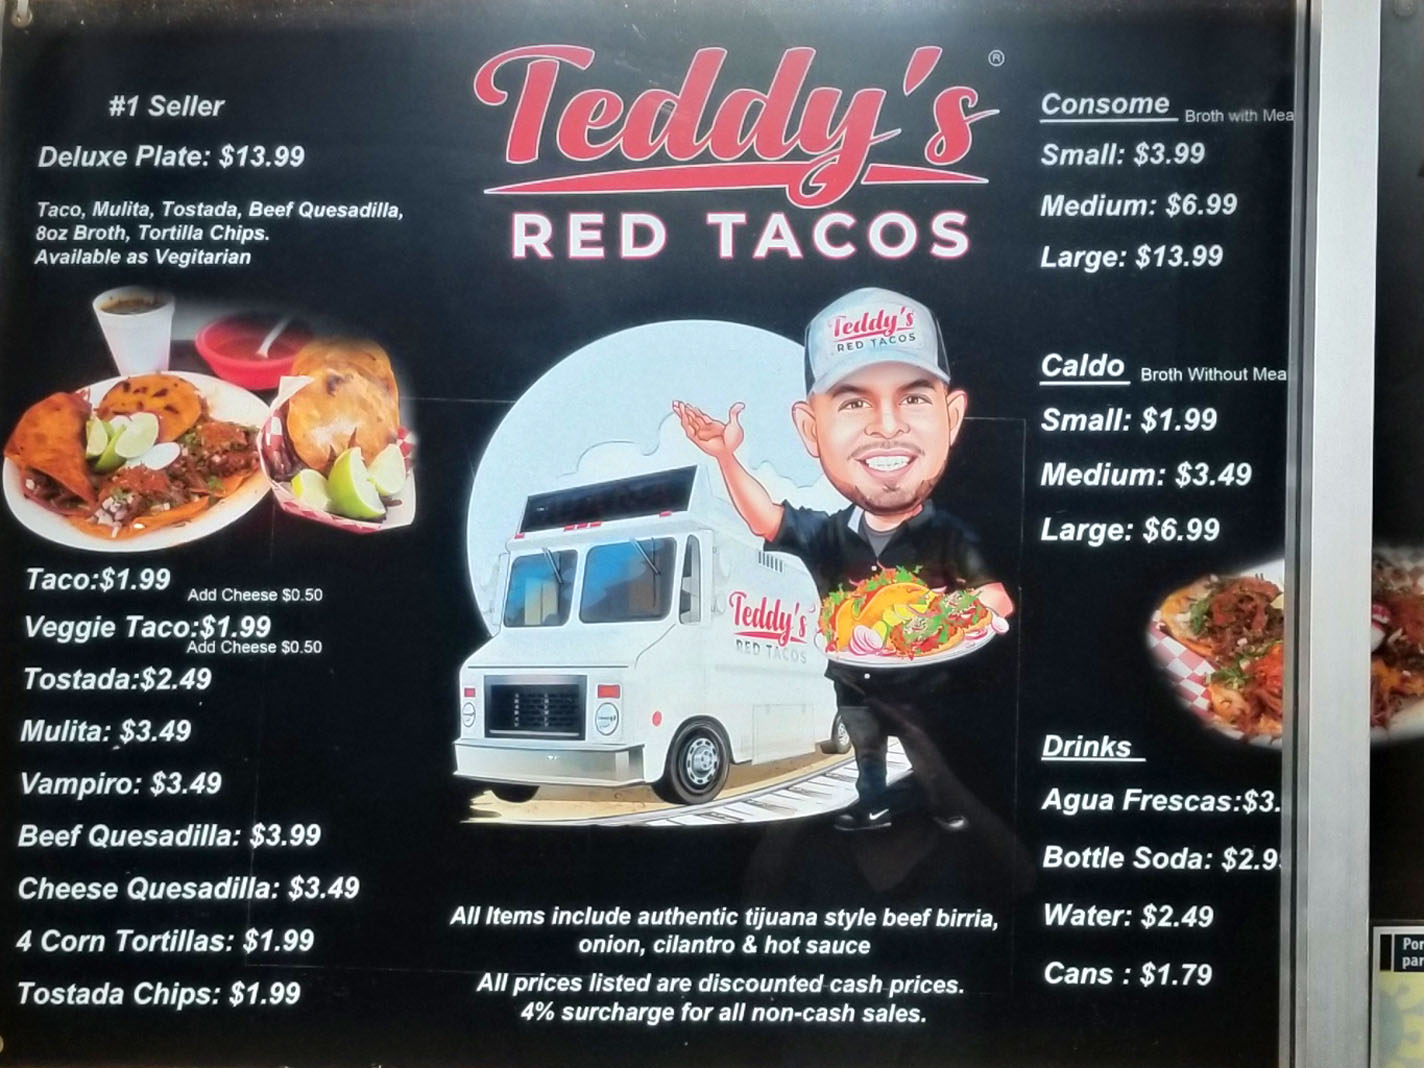 Teddy's Red Tacos (Downey, CA)